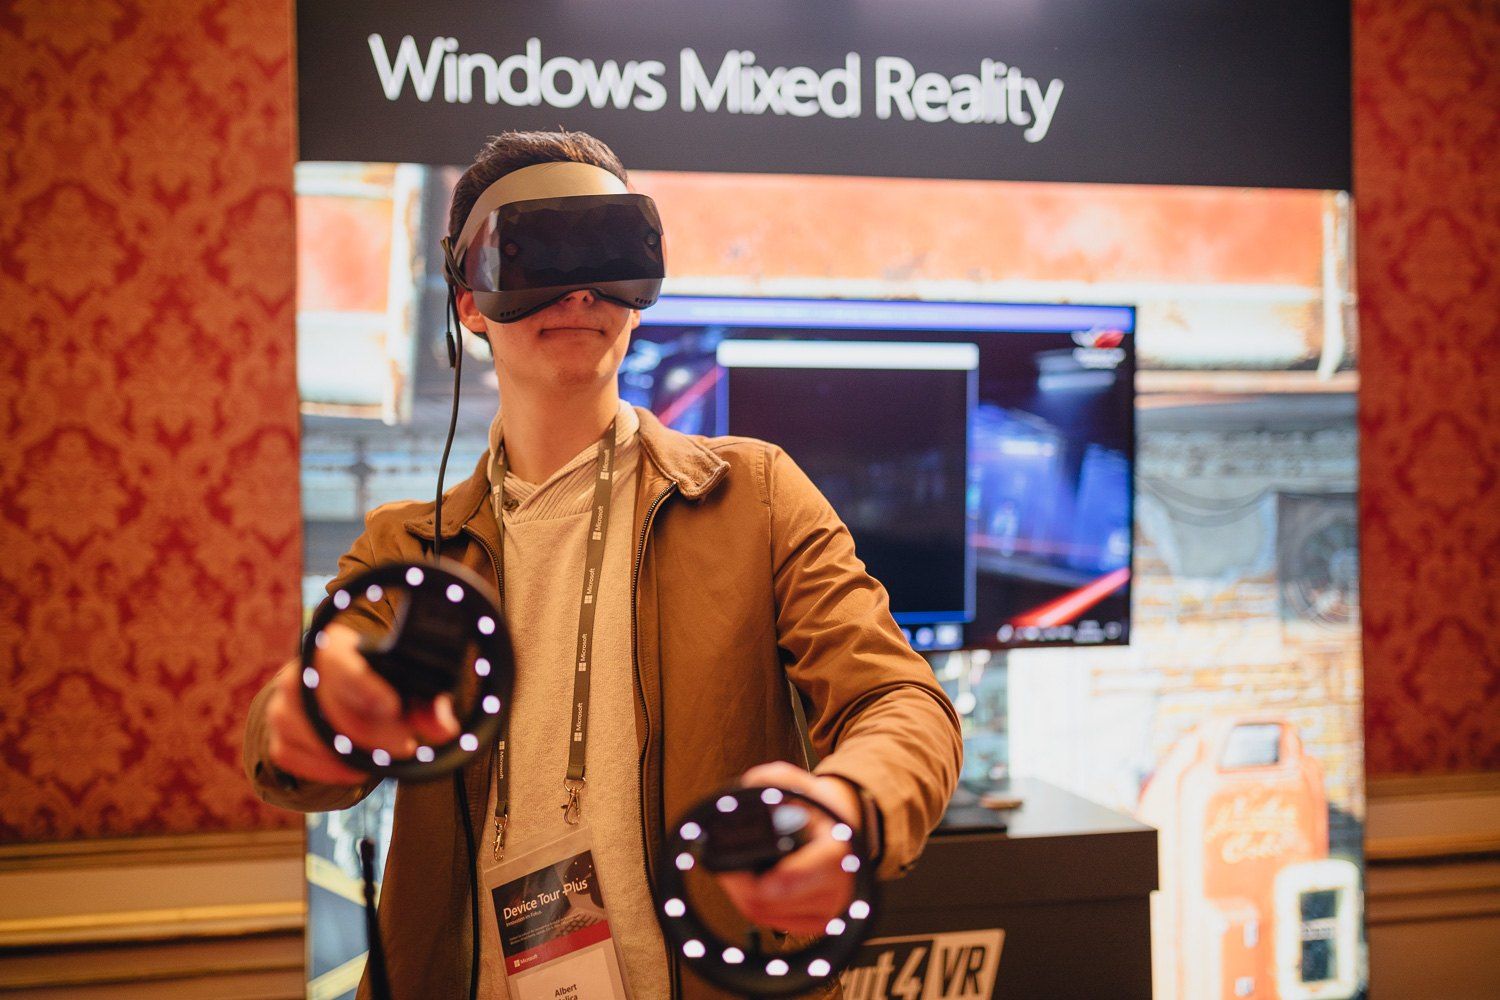 VirtualLink: Future Windows Mixed Reality headsets connected with a cable